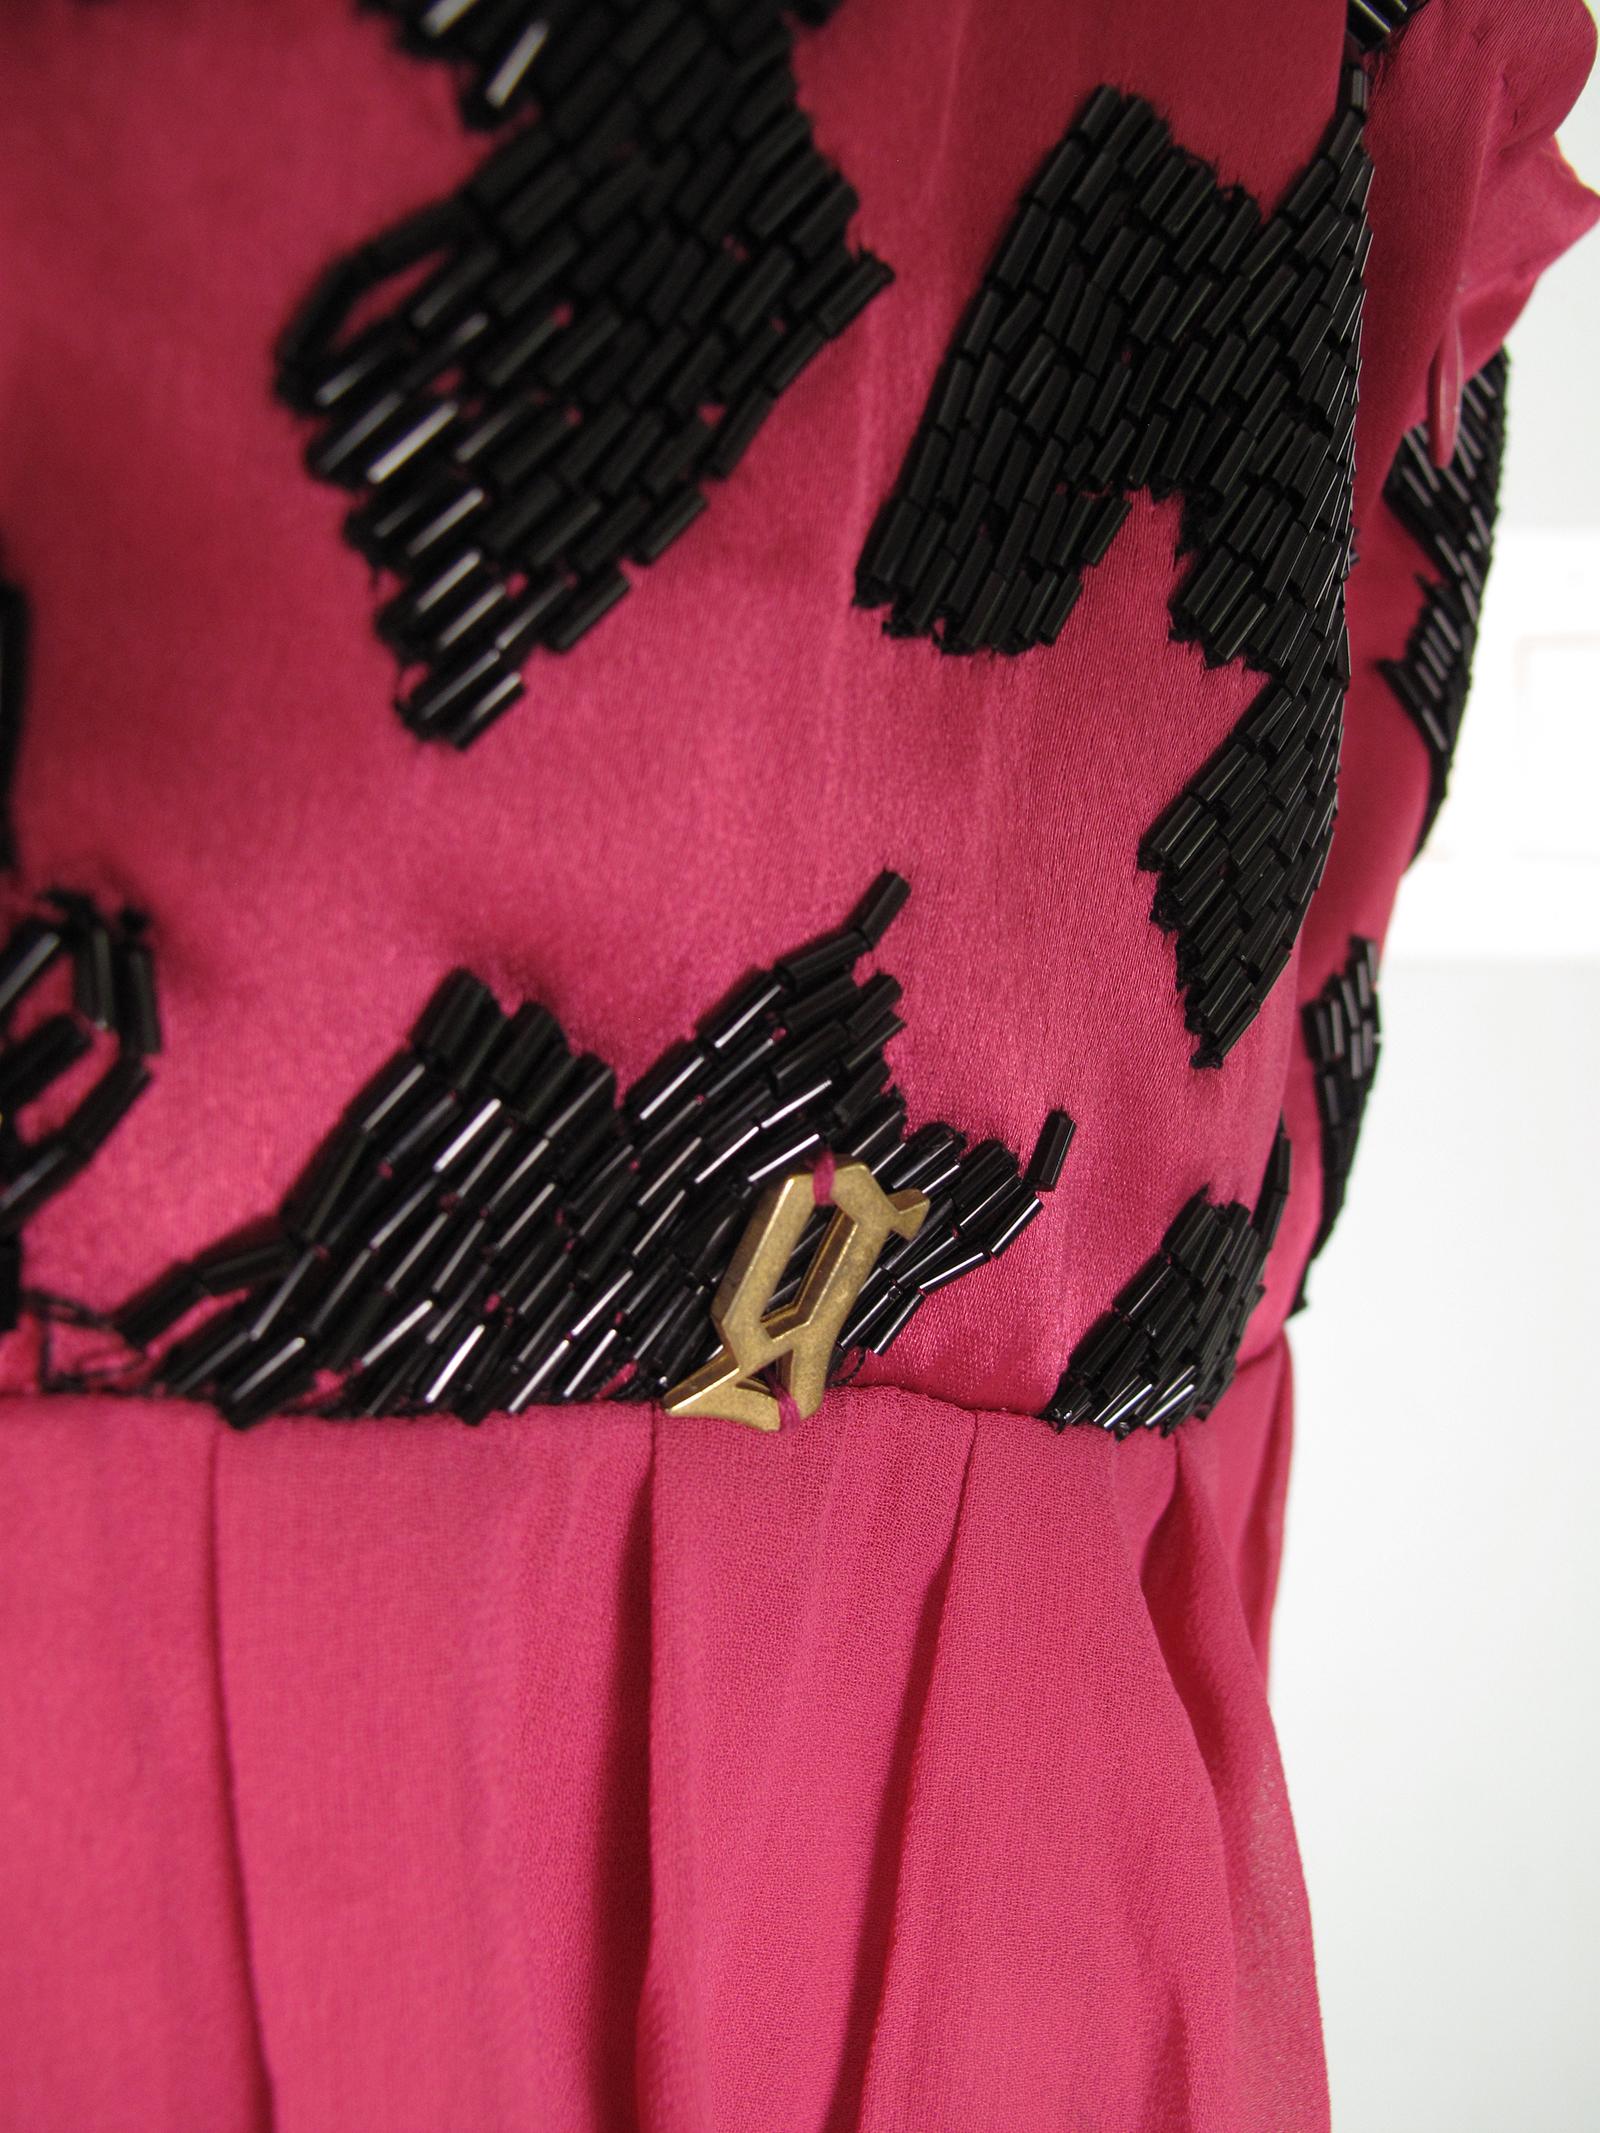 John Galliano fuchsia silk dress with black beading.  Condition: Good, some beads missing, see photos.  Size 44

We accept returns for refund, please see our terms.  We offer free ground shipping within the US.  